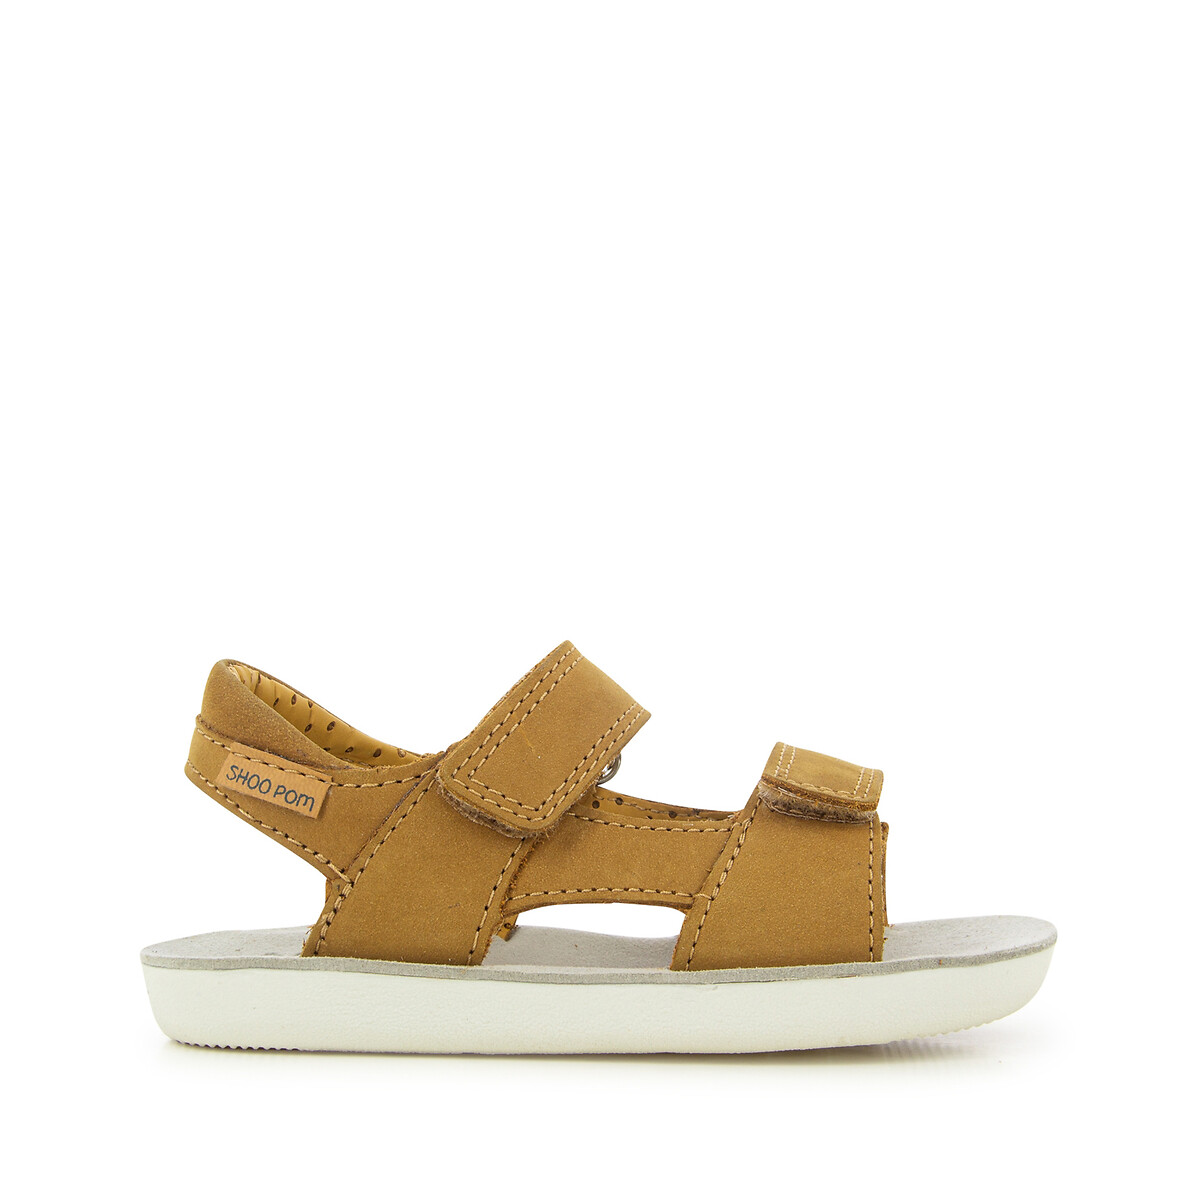 Kids Goa Boy Scratch Sandals in Leather with Touch ’n’ Close Fastening